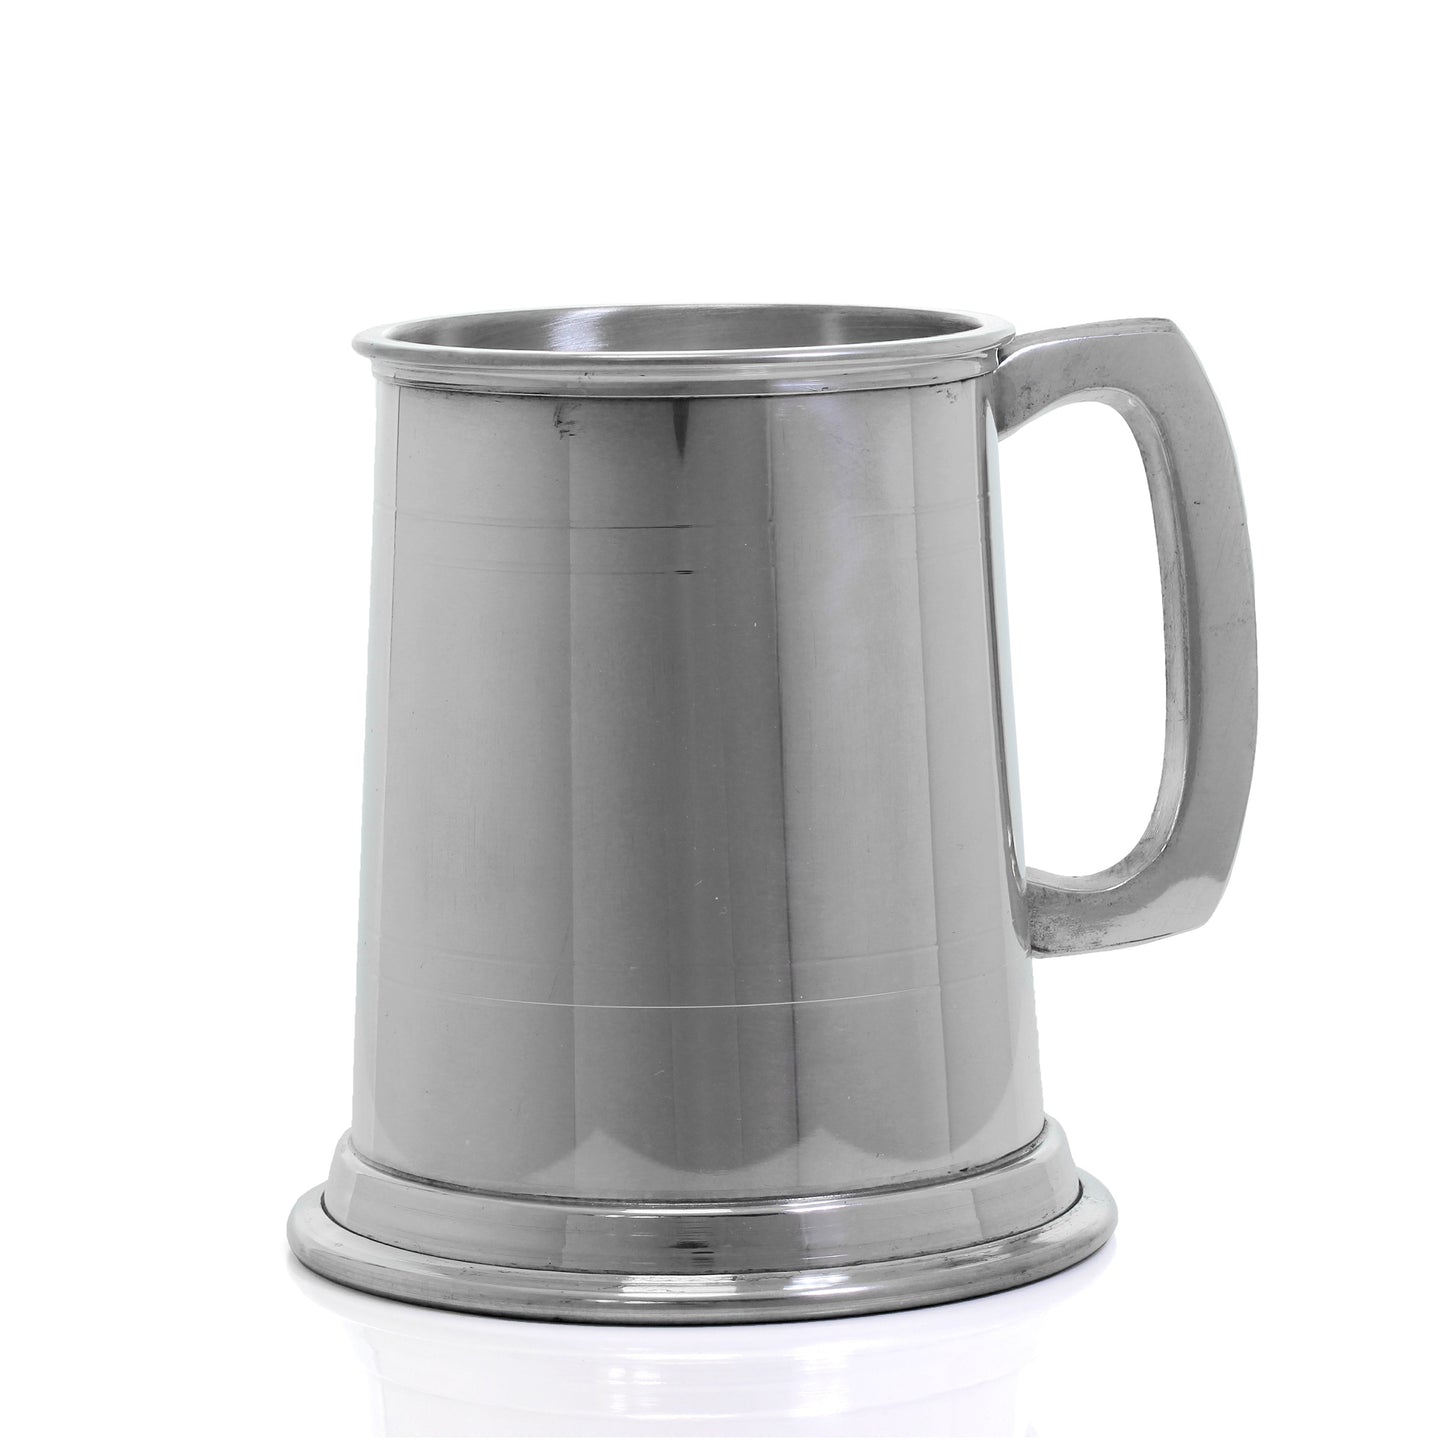 Commodore 1/2 Pint Engravable Pewter Tankard